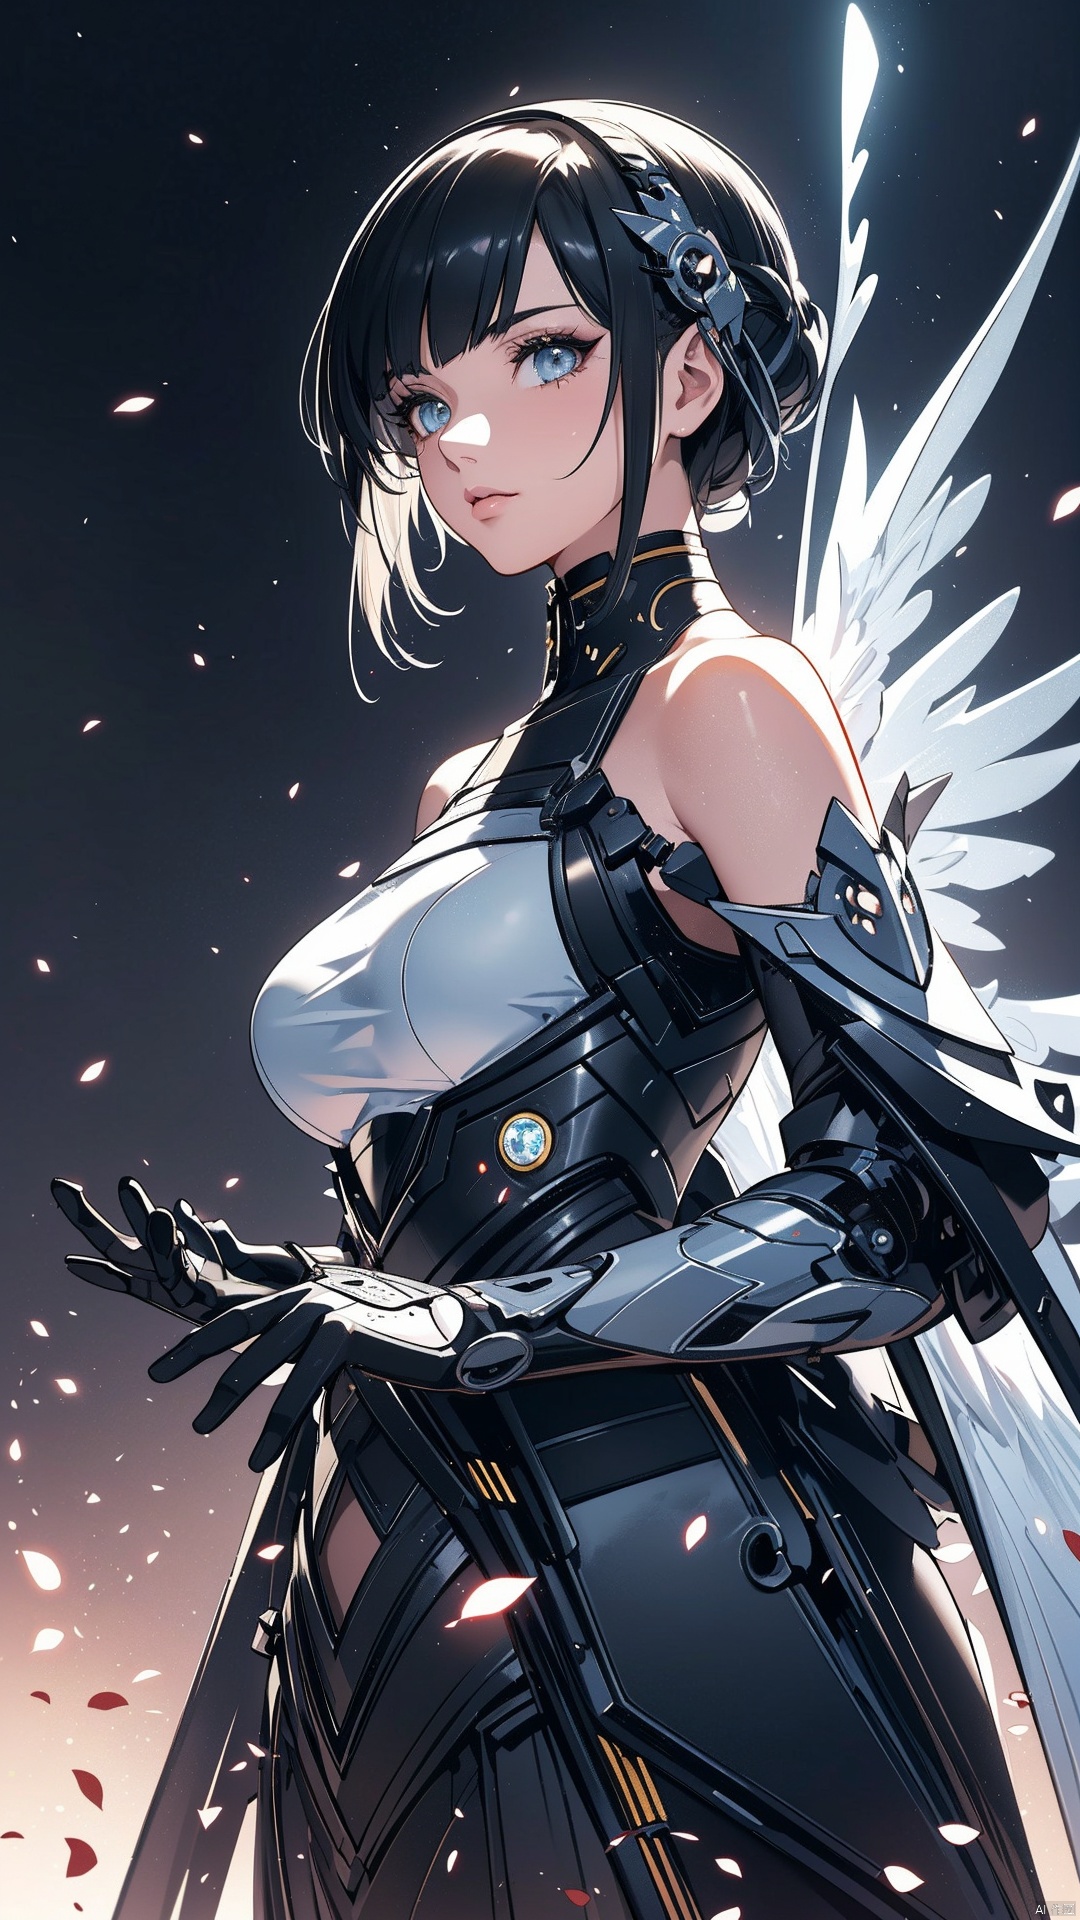 1girl,gray Combat Mech, (Pretty Girl),  bare Shoulder, Huge Breasts, Exquisite Mechanical Feeling, Details, Mech Wings, Elegance, gray Mech, Luminous white Eye,Black hair, gray round armor, smooth, wings,bare shoulder,White luminous decoration
masterpiece, best quality, official art, extremely detailed CG Unity 8k wallpaper, bright light,
(light particles, (illustration), (color) ,good-looking, perfect, (flat painting), (heavy brushstrokes), (bold lines), highest image quality, 
masterpiece, fine, long eyelashes, ((contour)), extremely detailed background description, gray off the shoulder skirt, mottled, (character close-up), correct and accurate hand painting, accurate and precise fingers, (Science Fiction), Future, Cyberpunk,, fazhenn
, cyberpunk